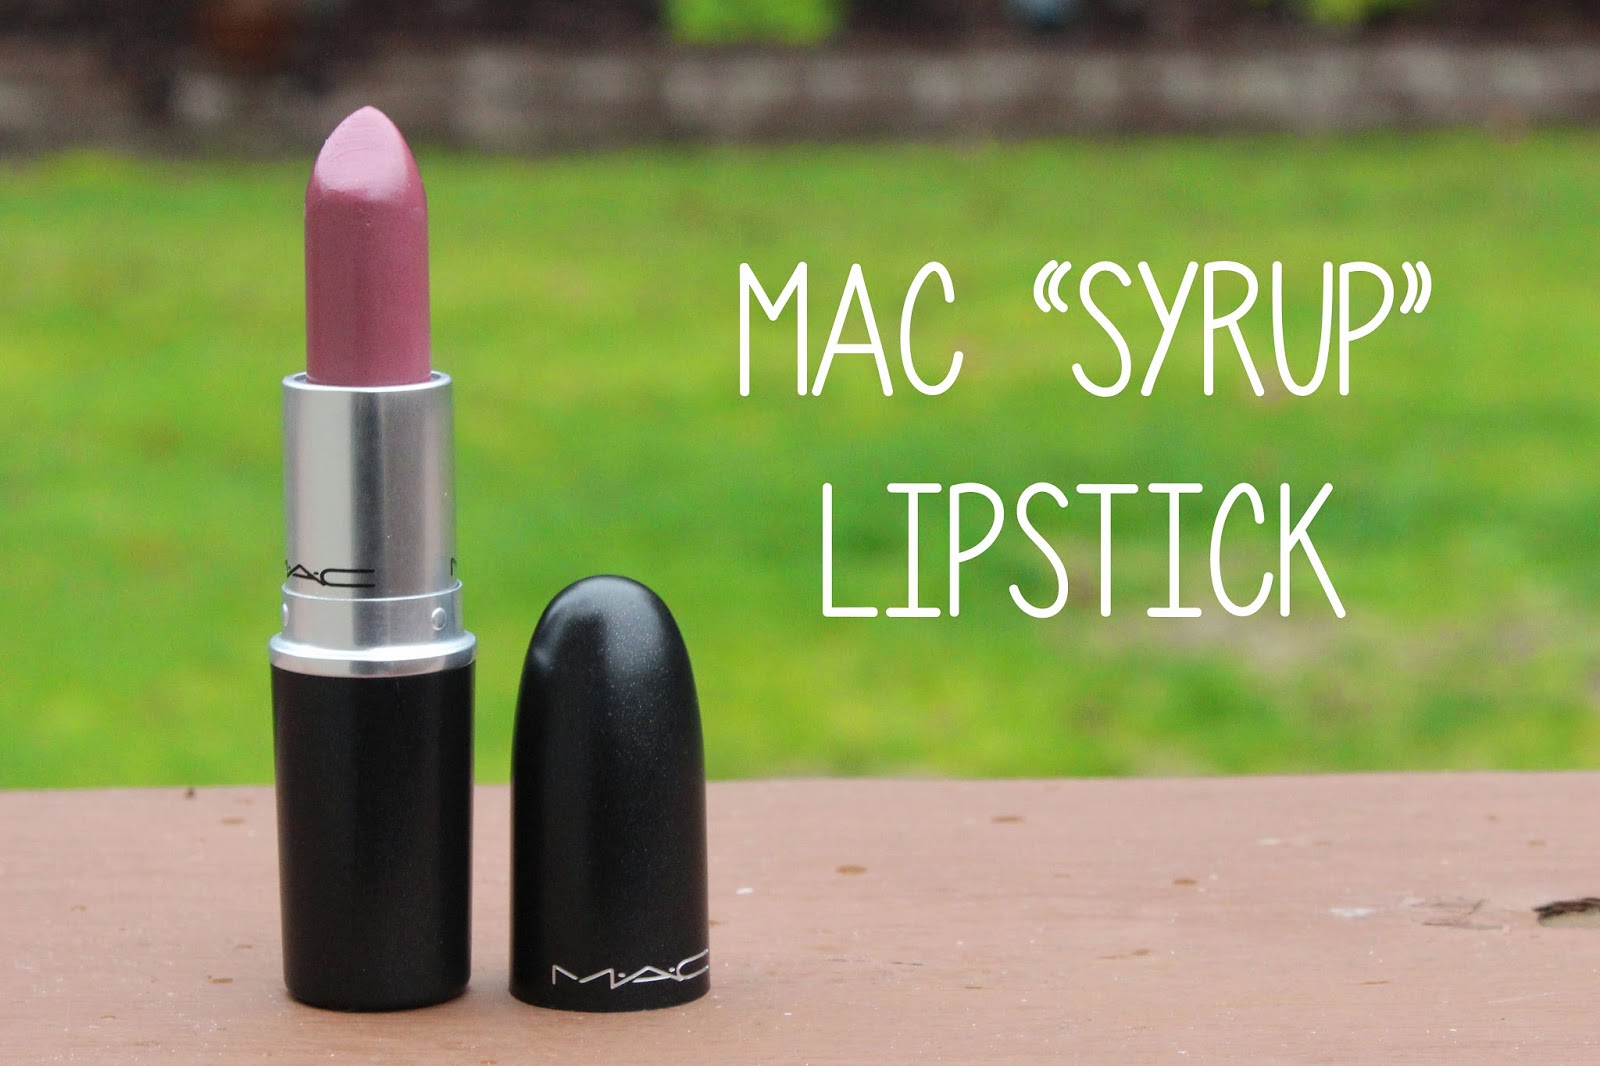 MAC "Syrup" Lipstick Swatch + Review.